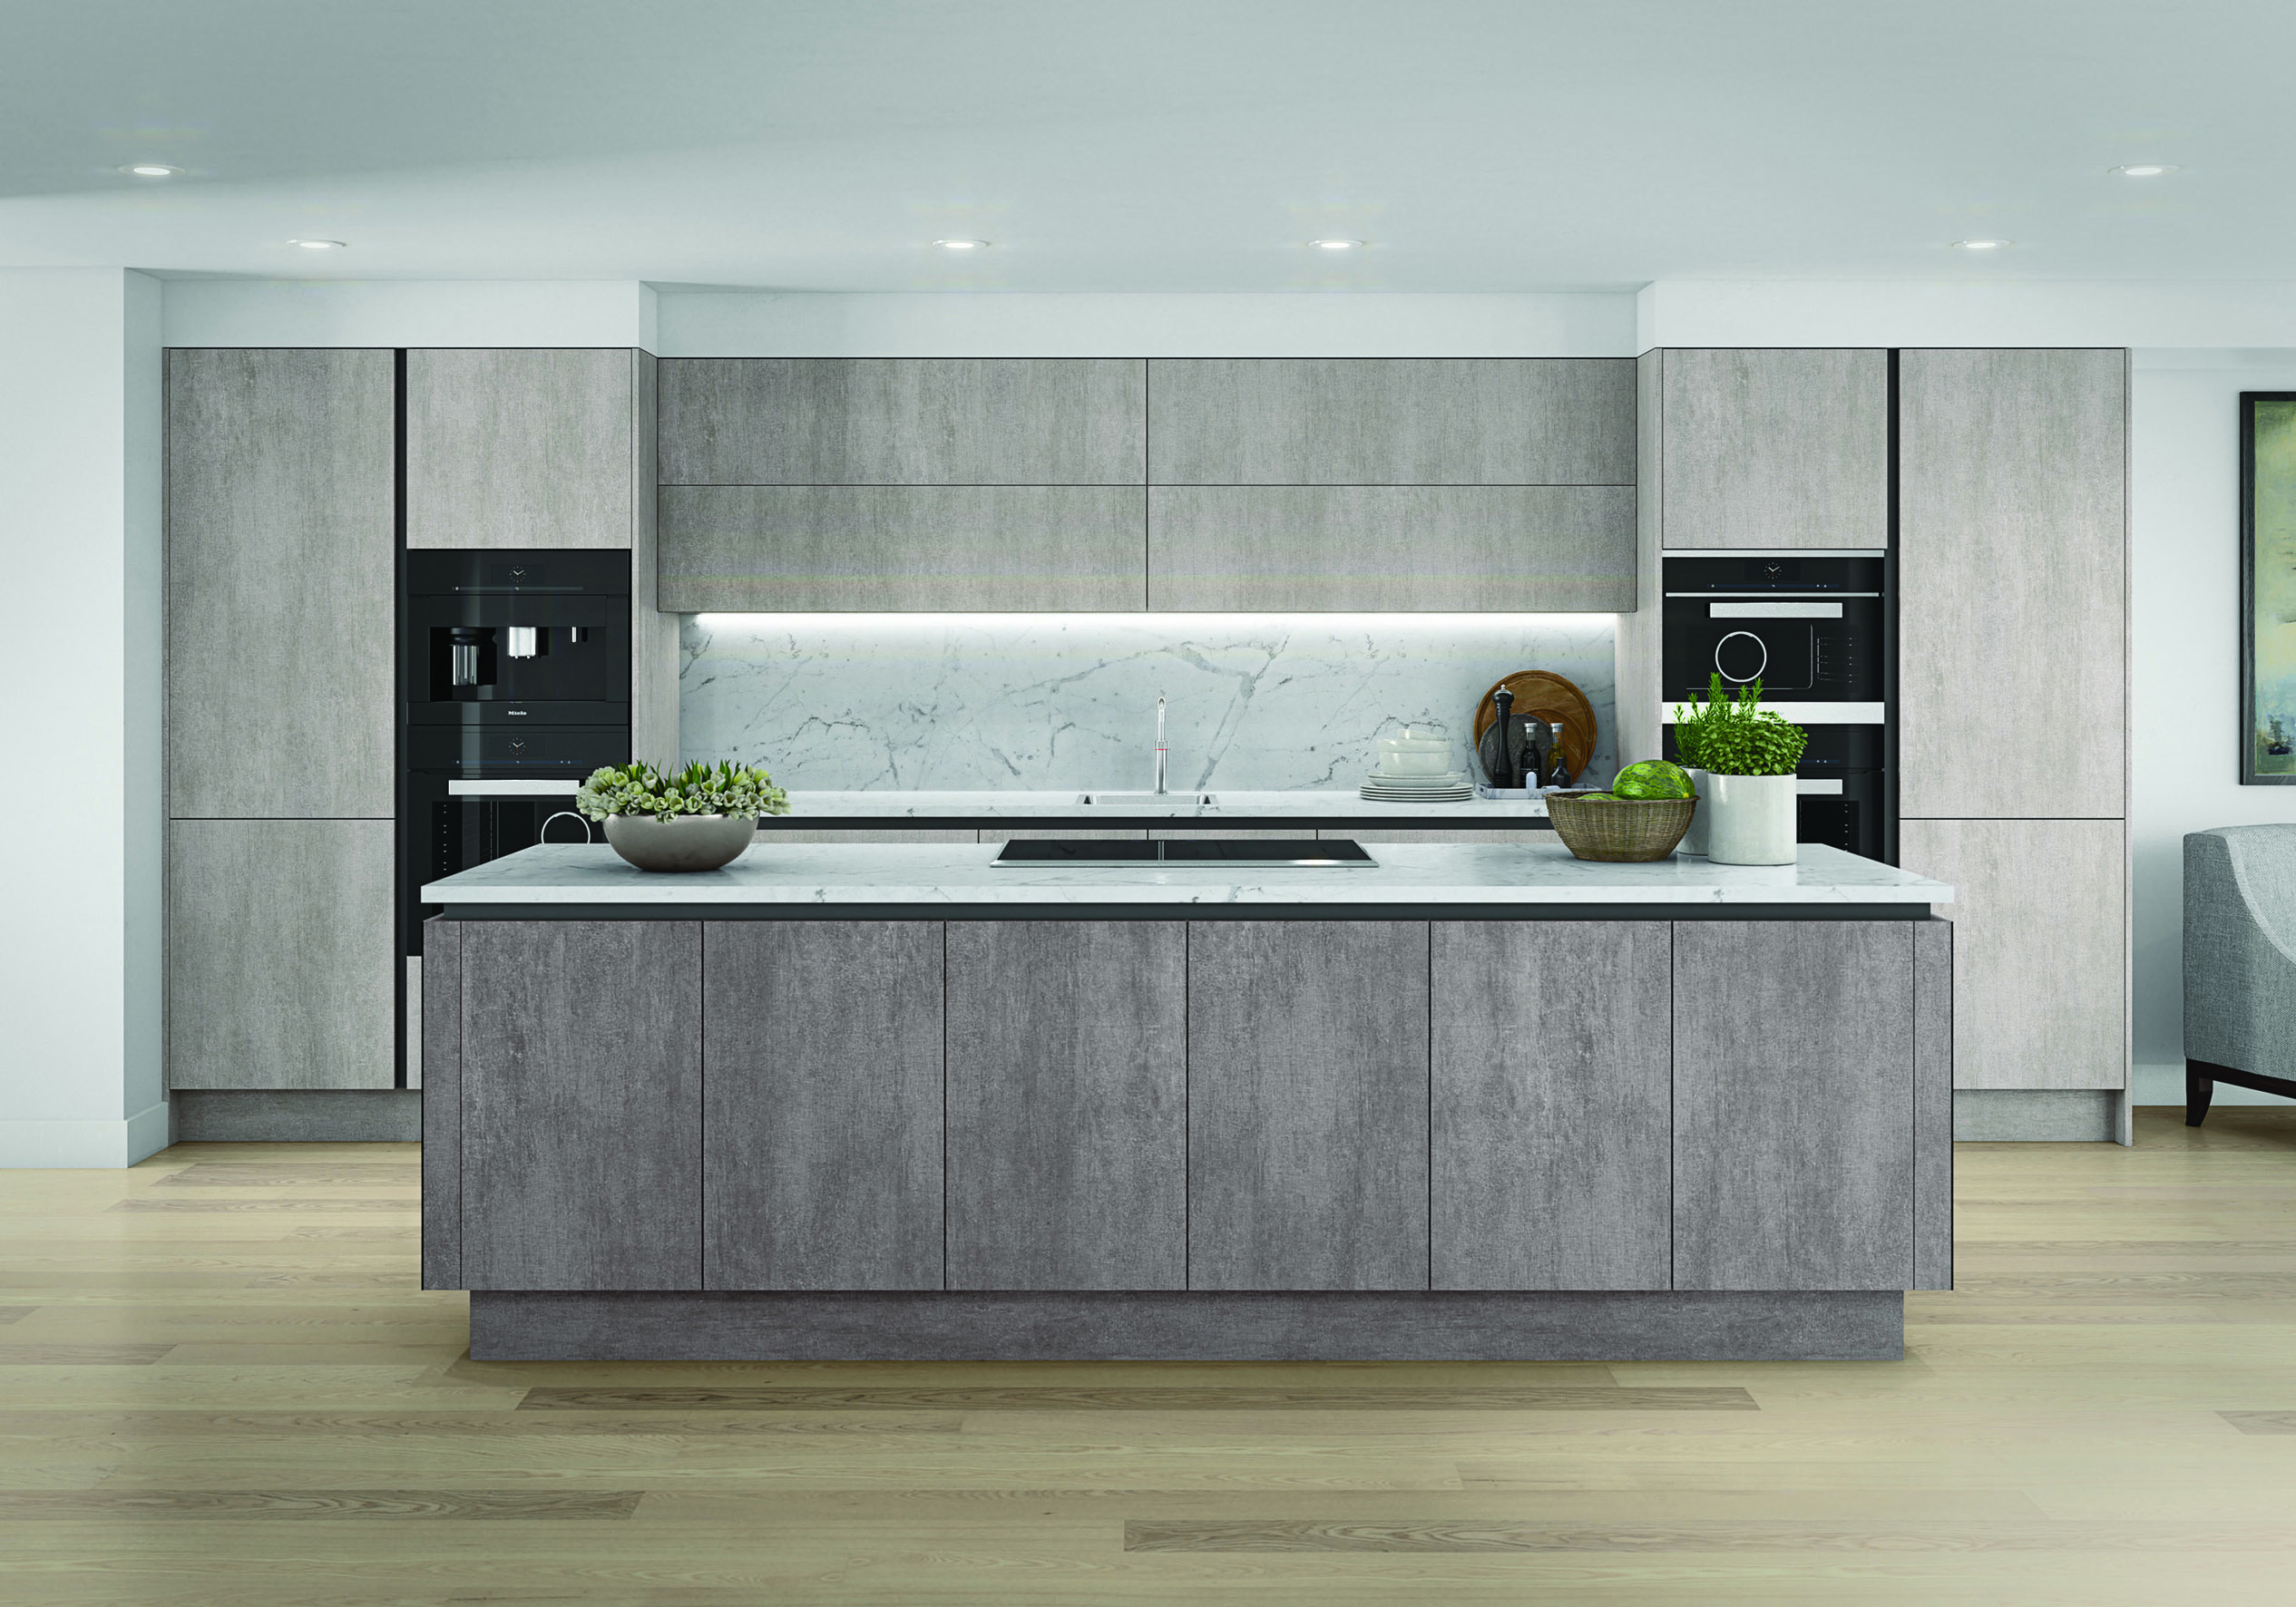 Renzo by Daval wins GOLD for ‘Innovation in Kitchen Product Design’ @Daval_Furniture @designerawardUK